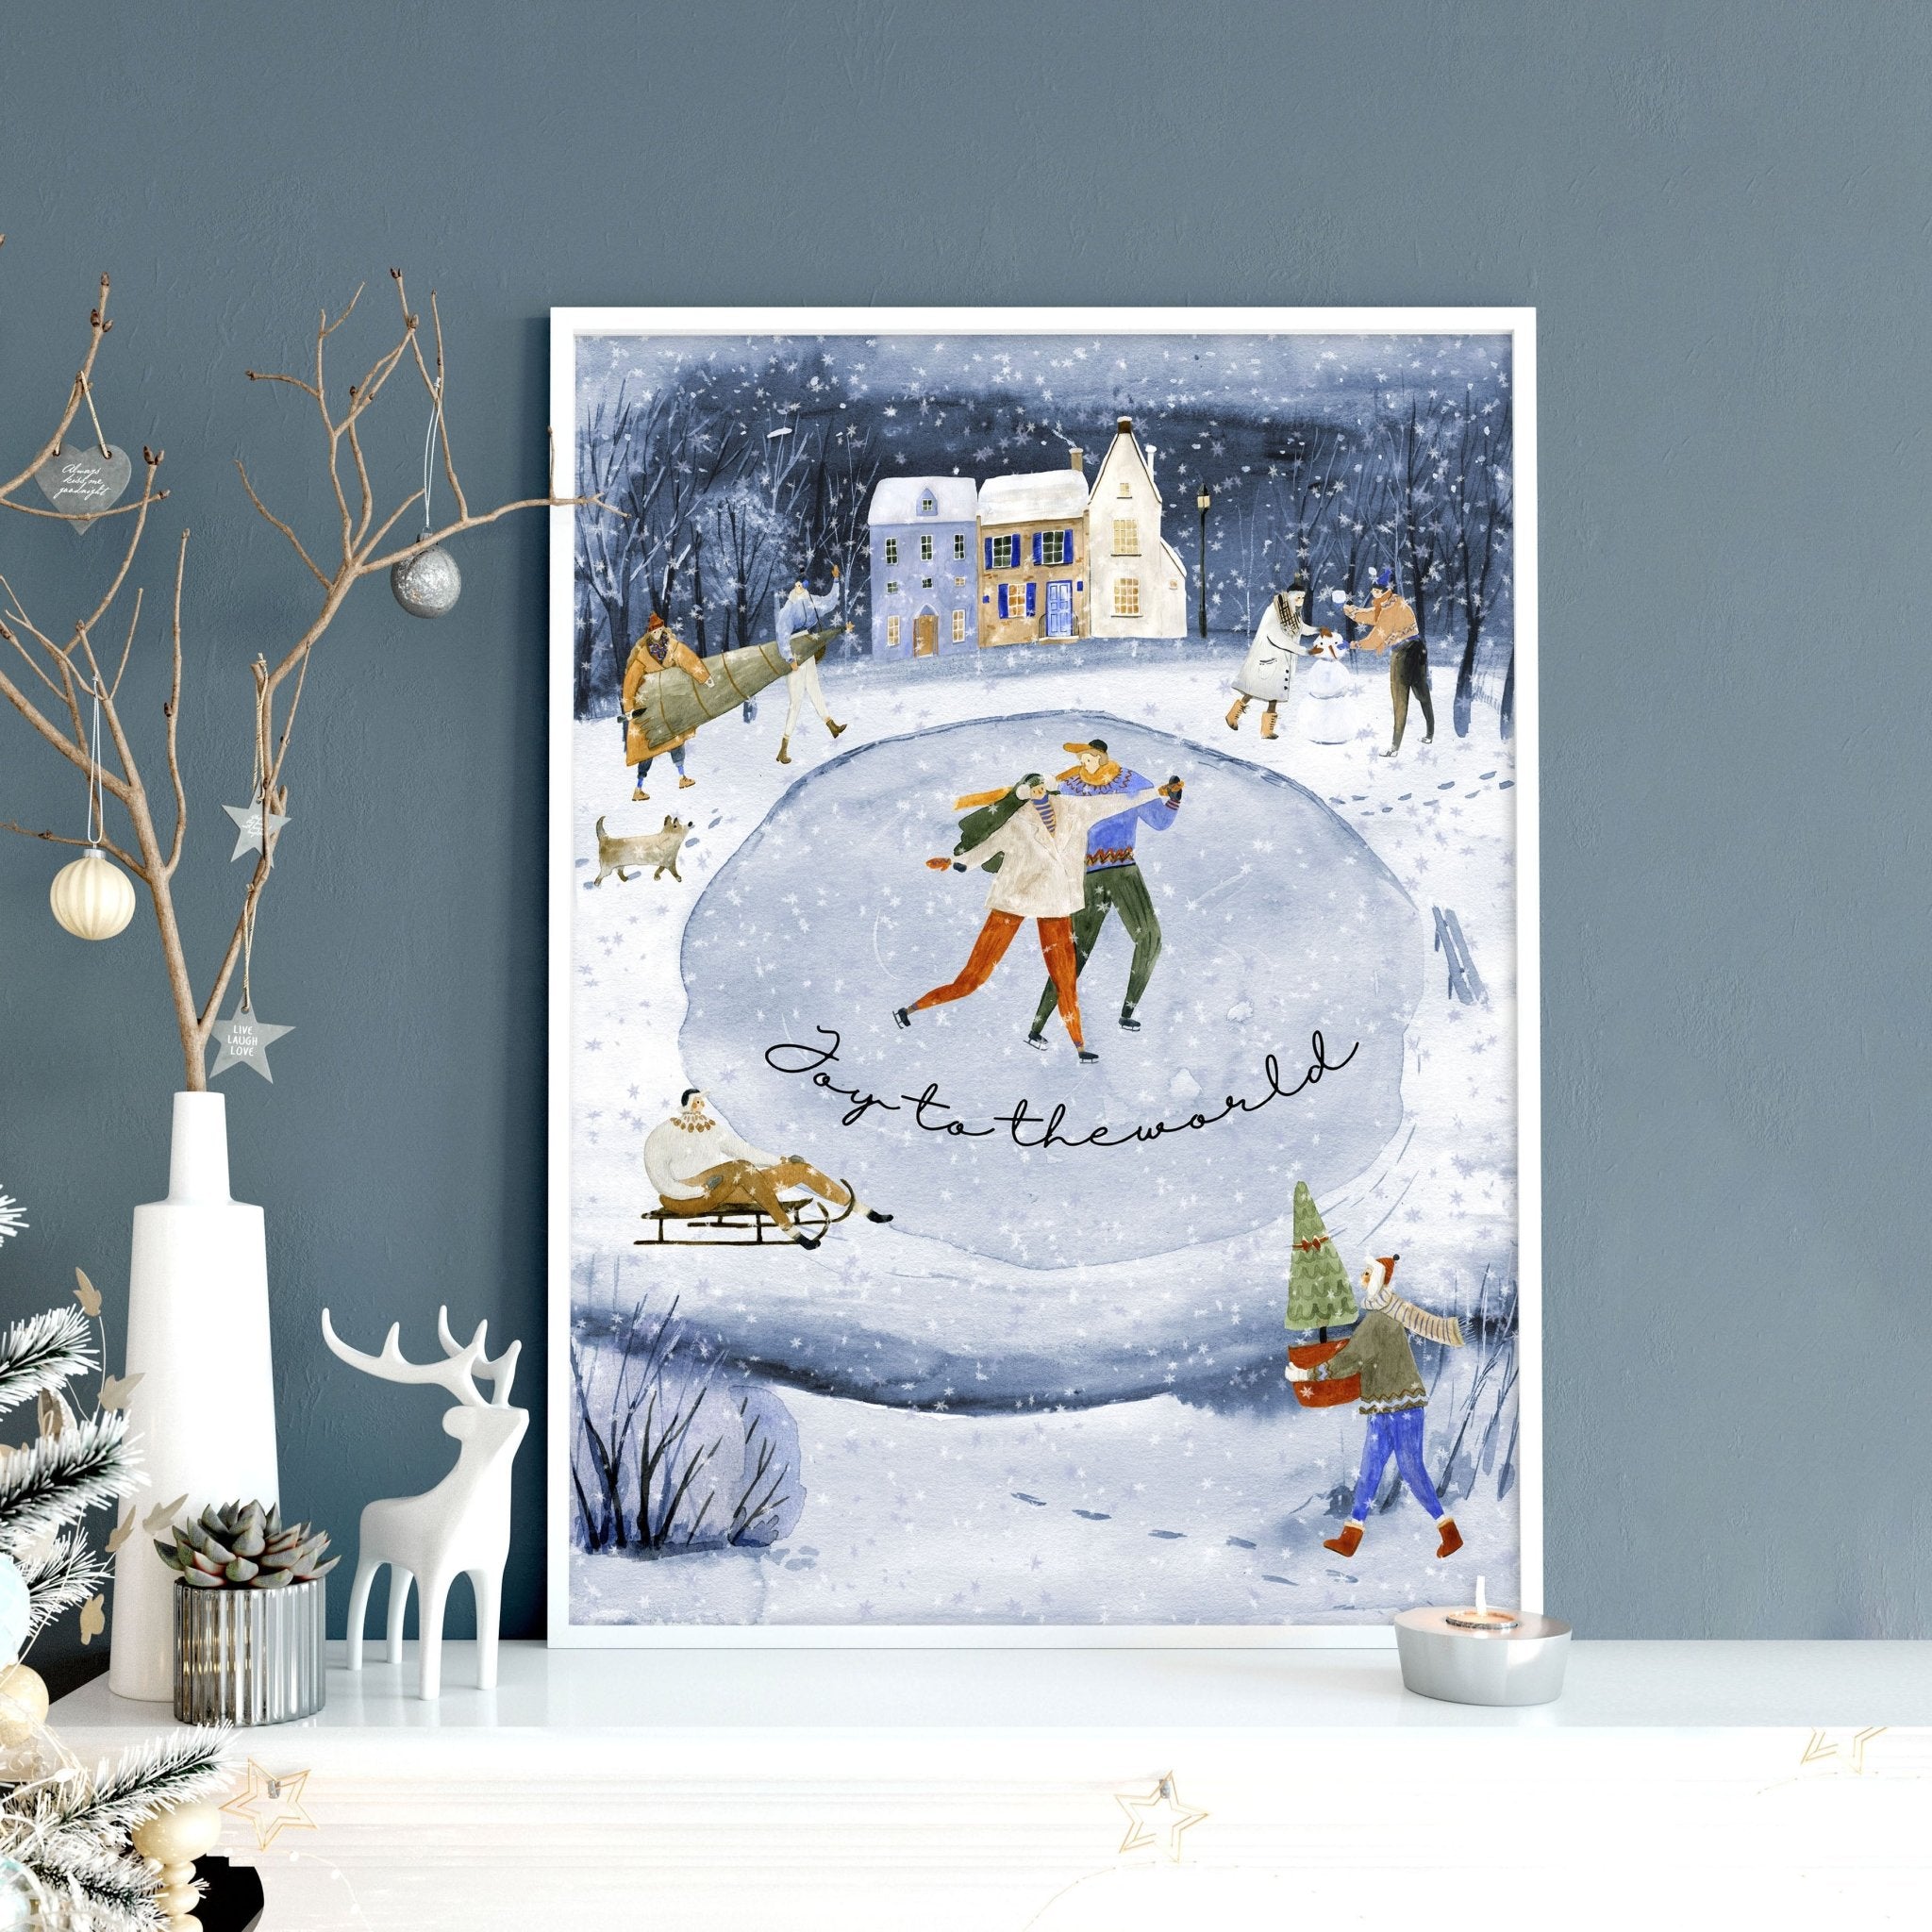 Christmas wall decorations for indoor - About Wall Art